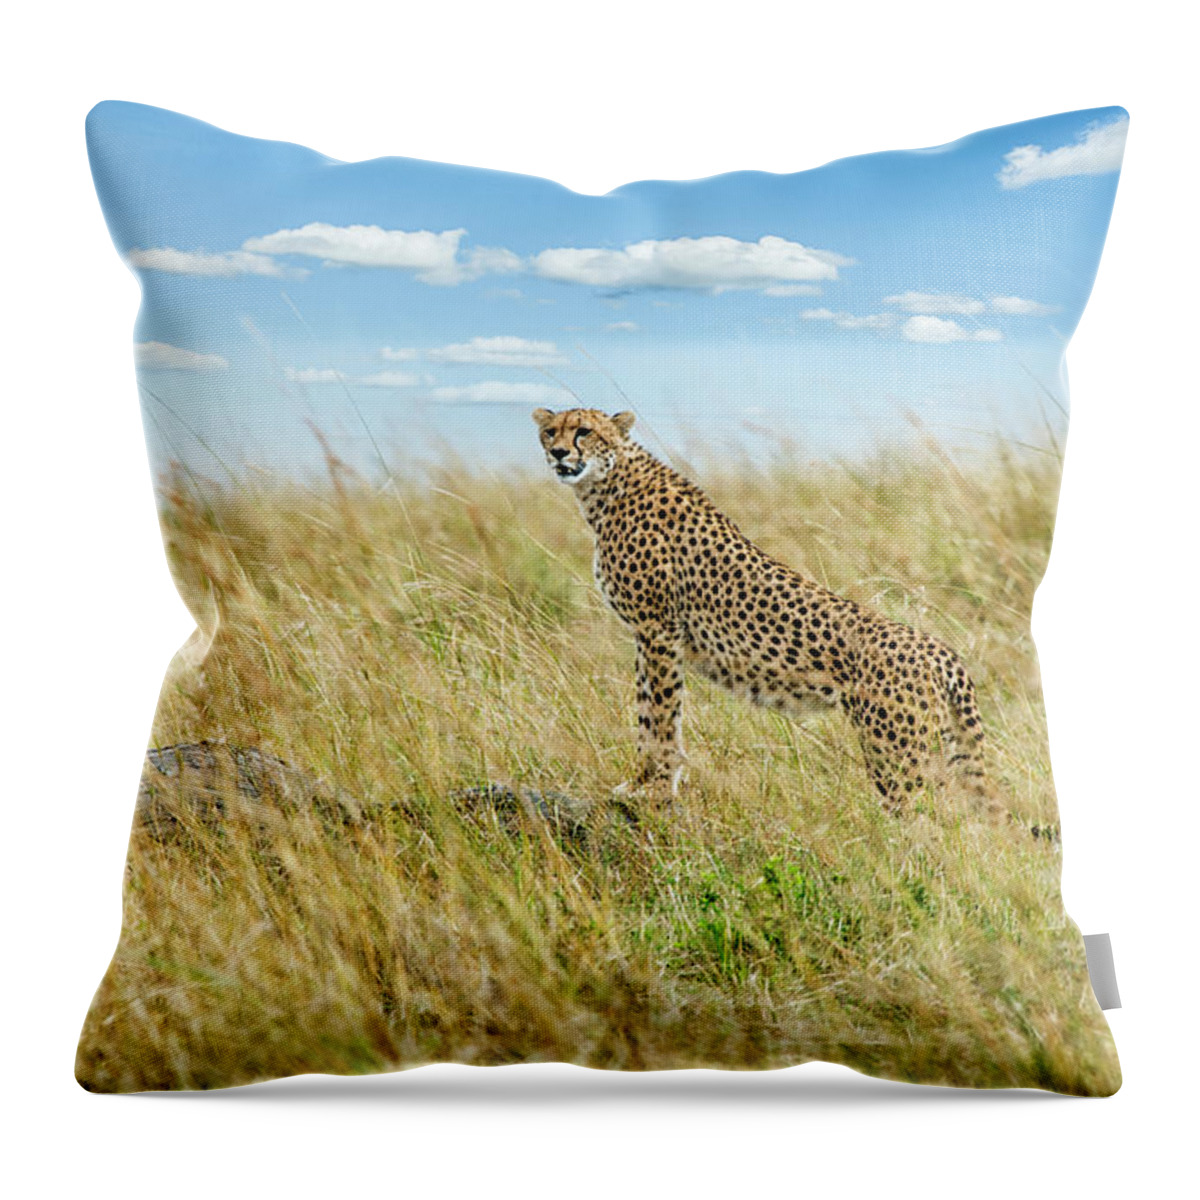 Scenics Throw Pillow featuring the photograph Cheetah In Savannah Grassland by Mike Hill